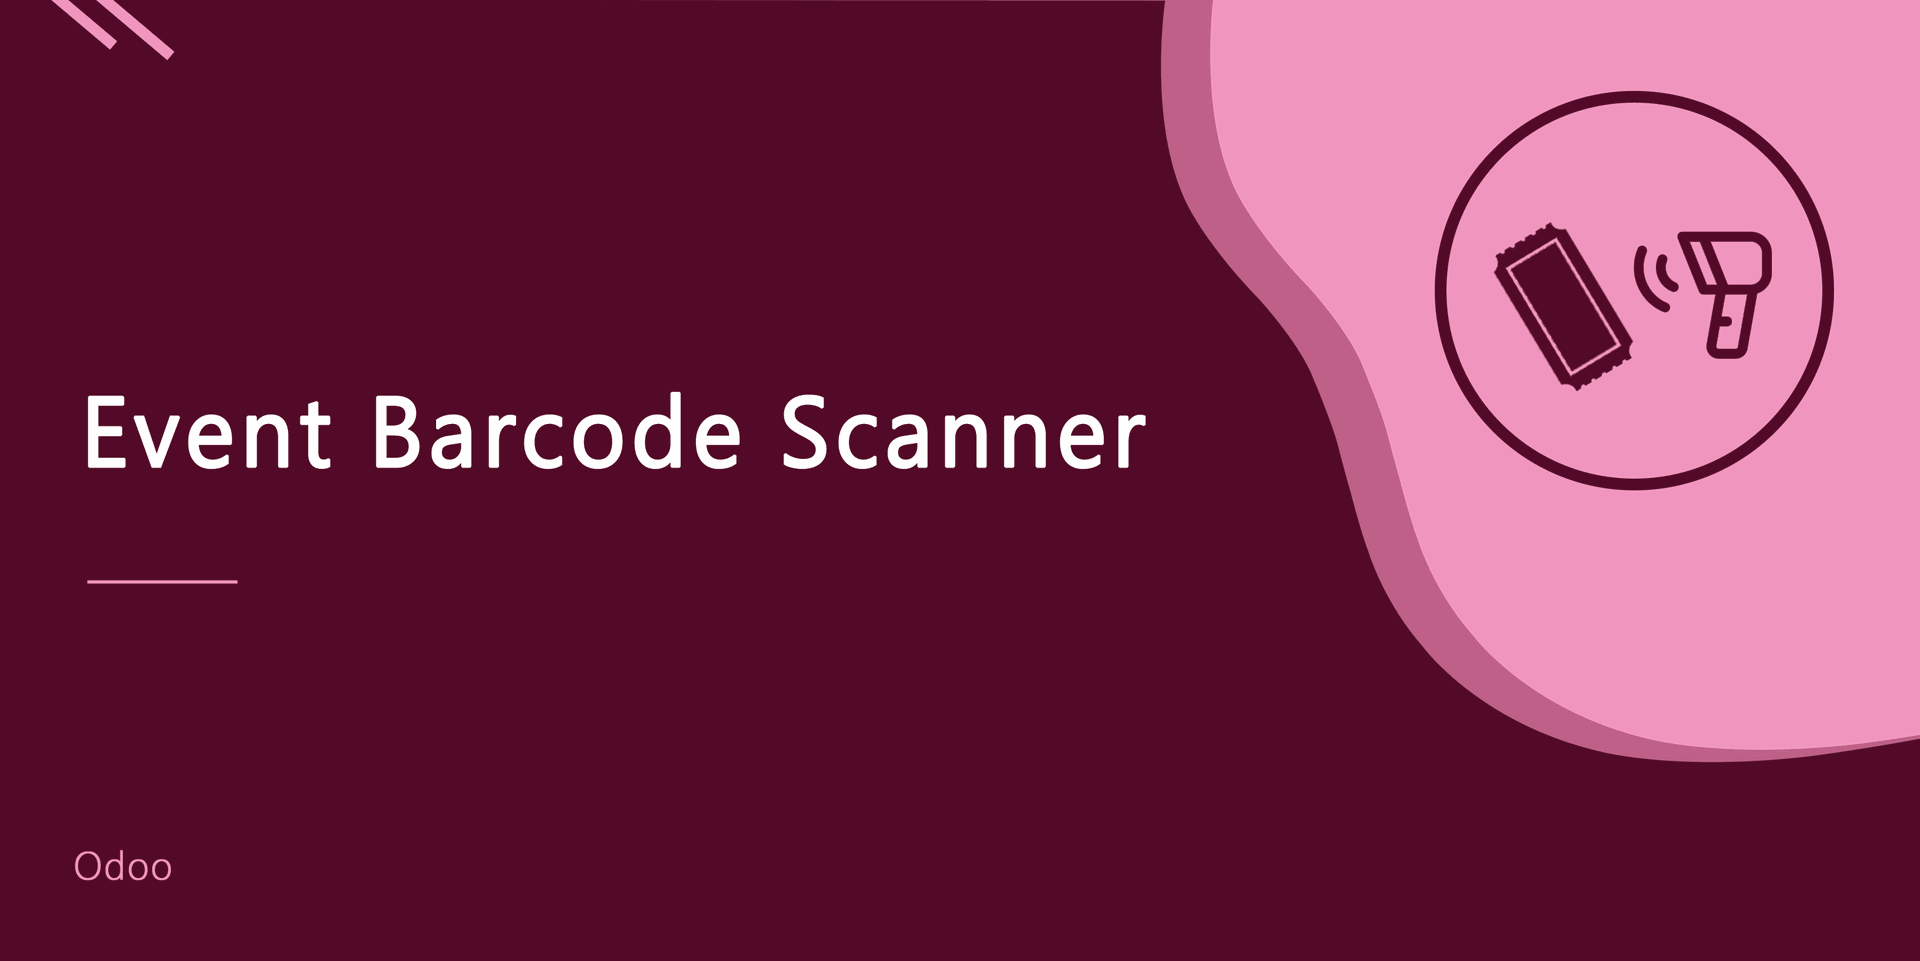 Event Barcode Scanner
